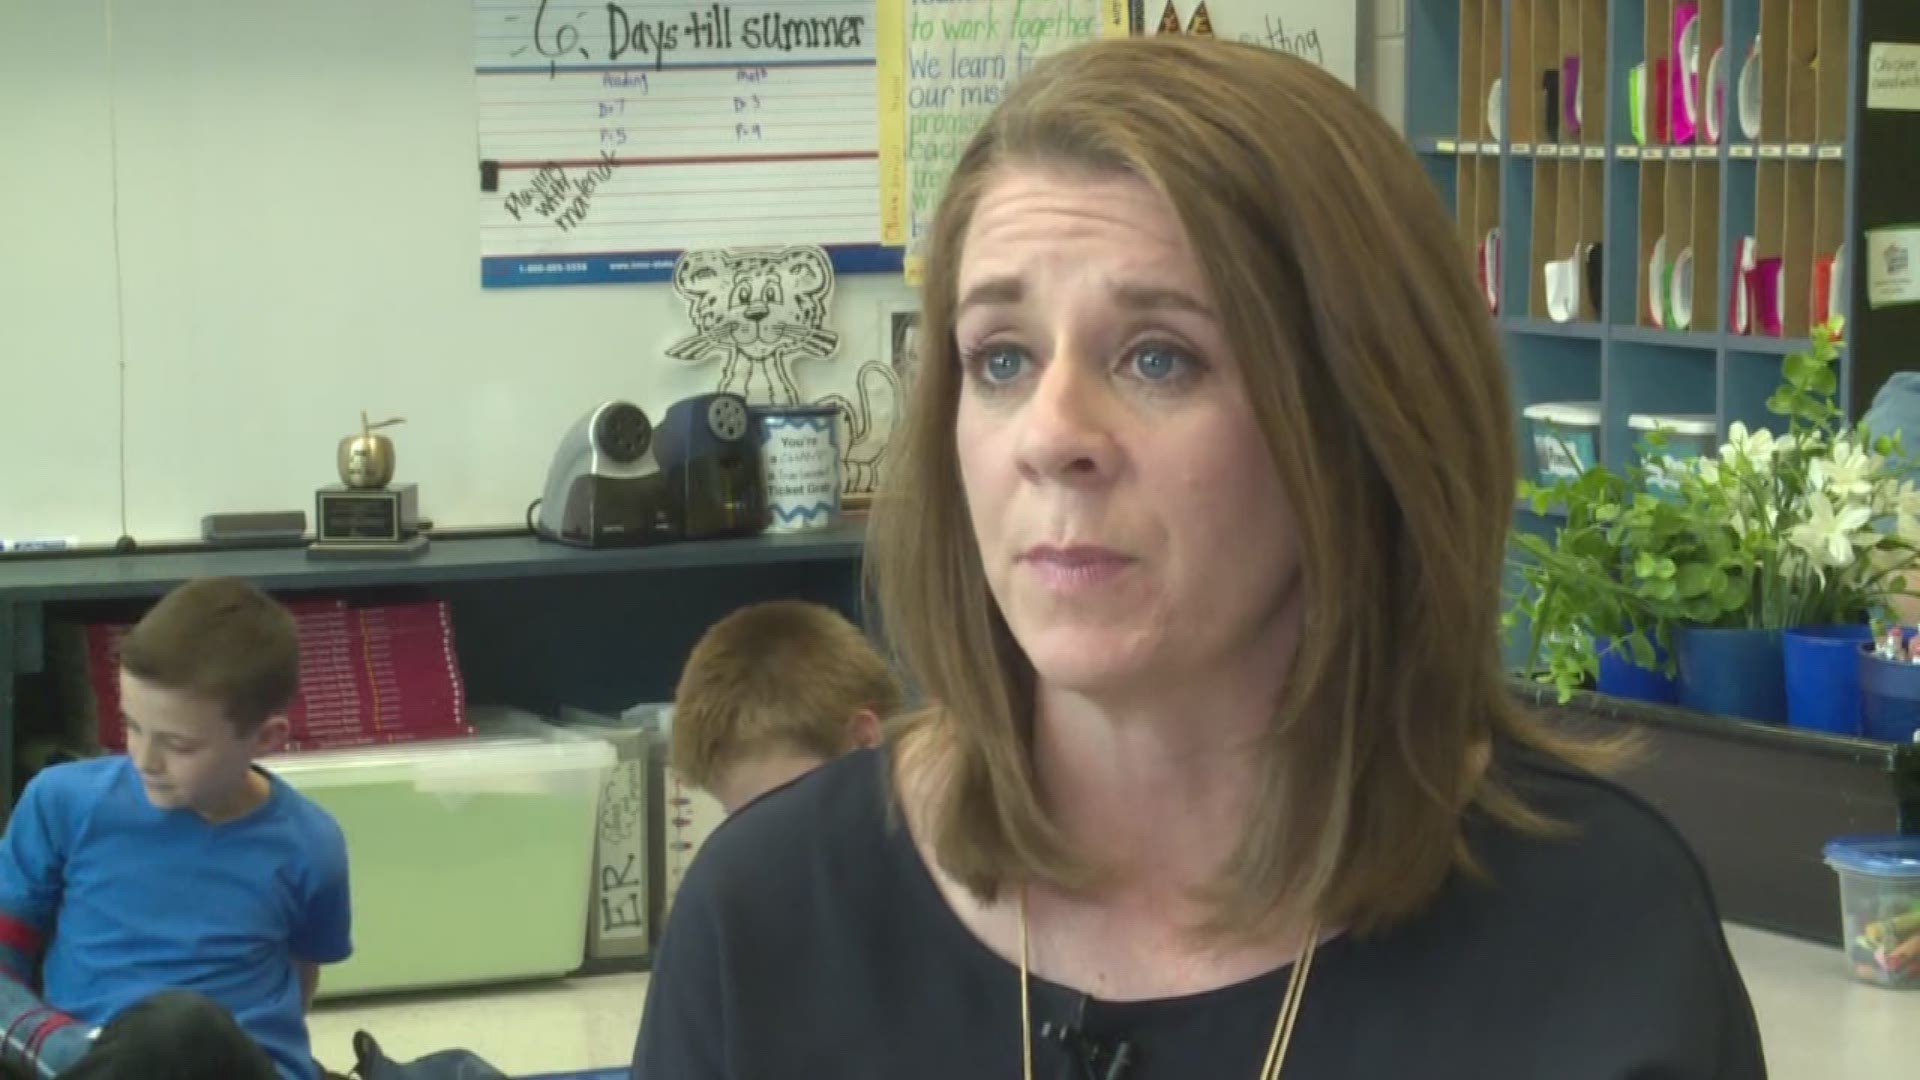 A third grade teacher at La Grange Elementary School has been chosen as Oldham County's ExCel Award winner for this academic year.